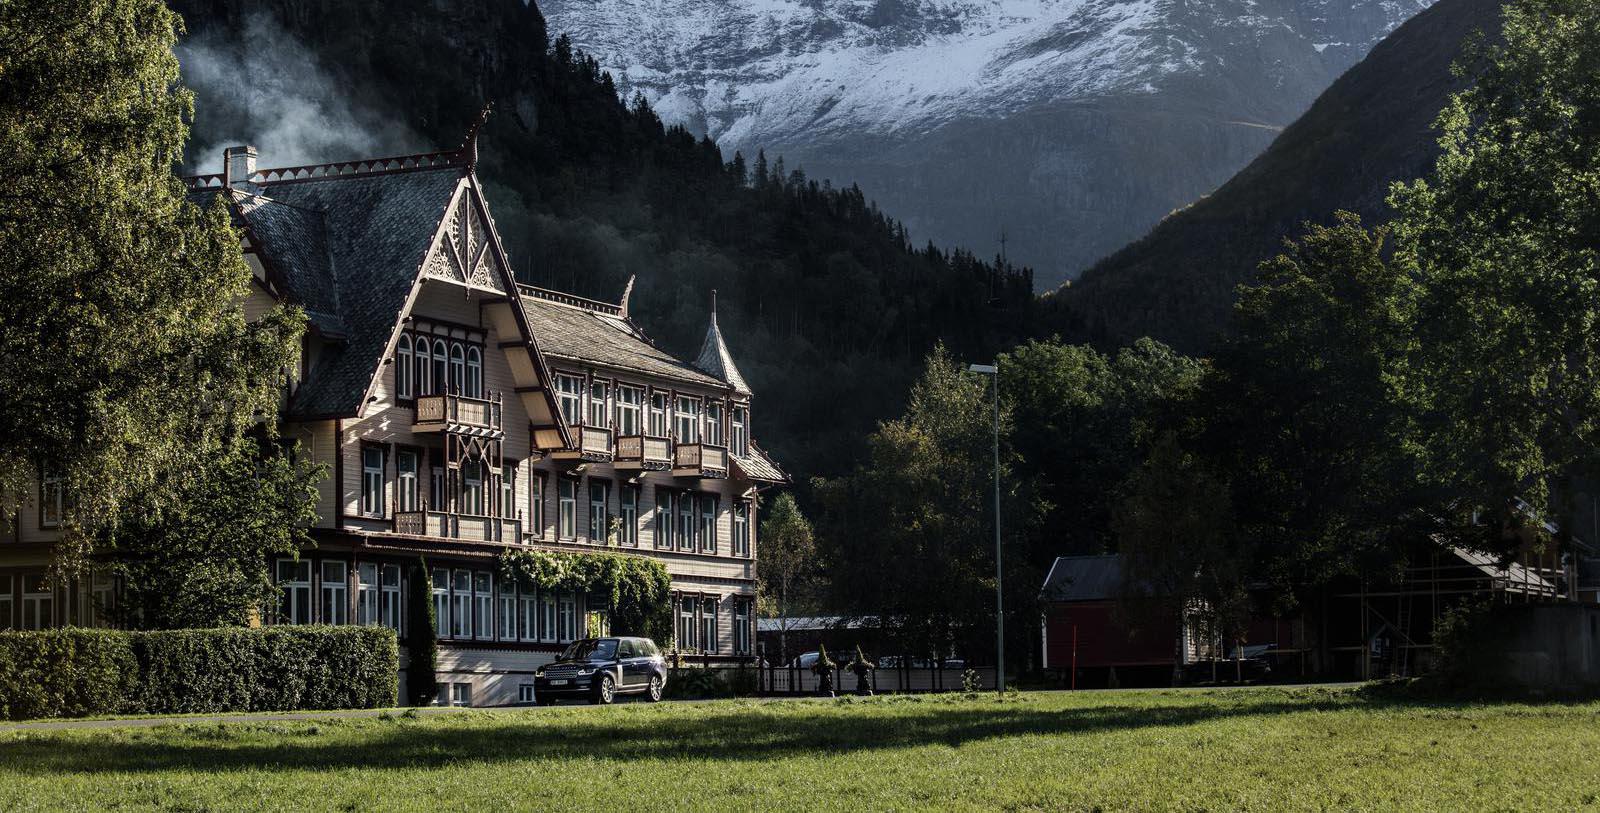 Image of Exterior & Mountains, Hotel Union Øye, Norangsfjorden, Norway, 1891, Member of Historic Hotels Worldwide, Special Offers, Discounted Rates, Families, Romantic Escape, Honeymoons, Anniversaries, Reunions